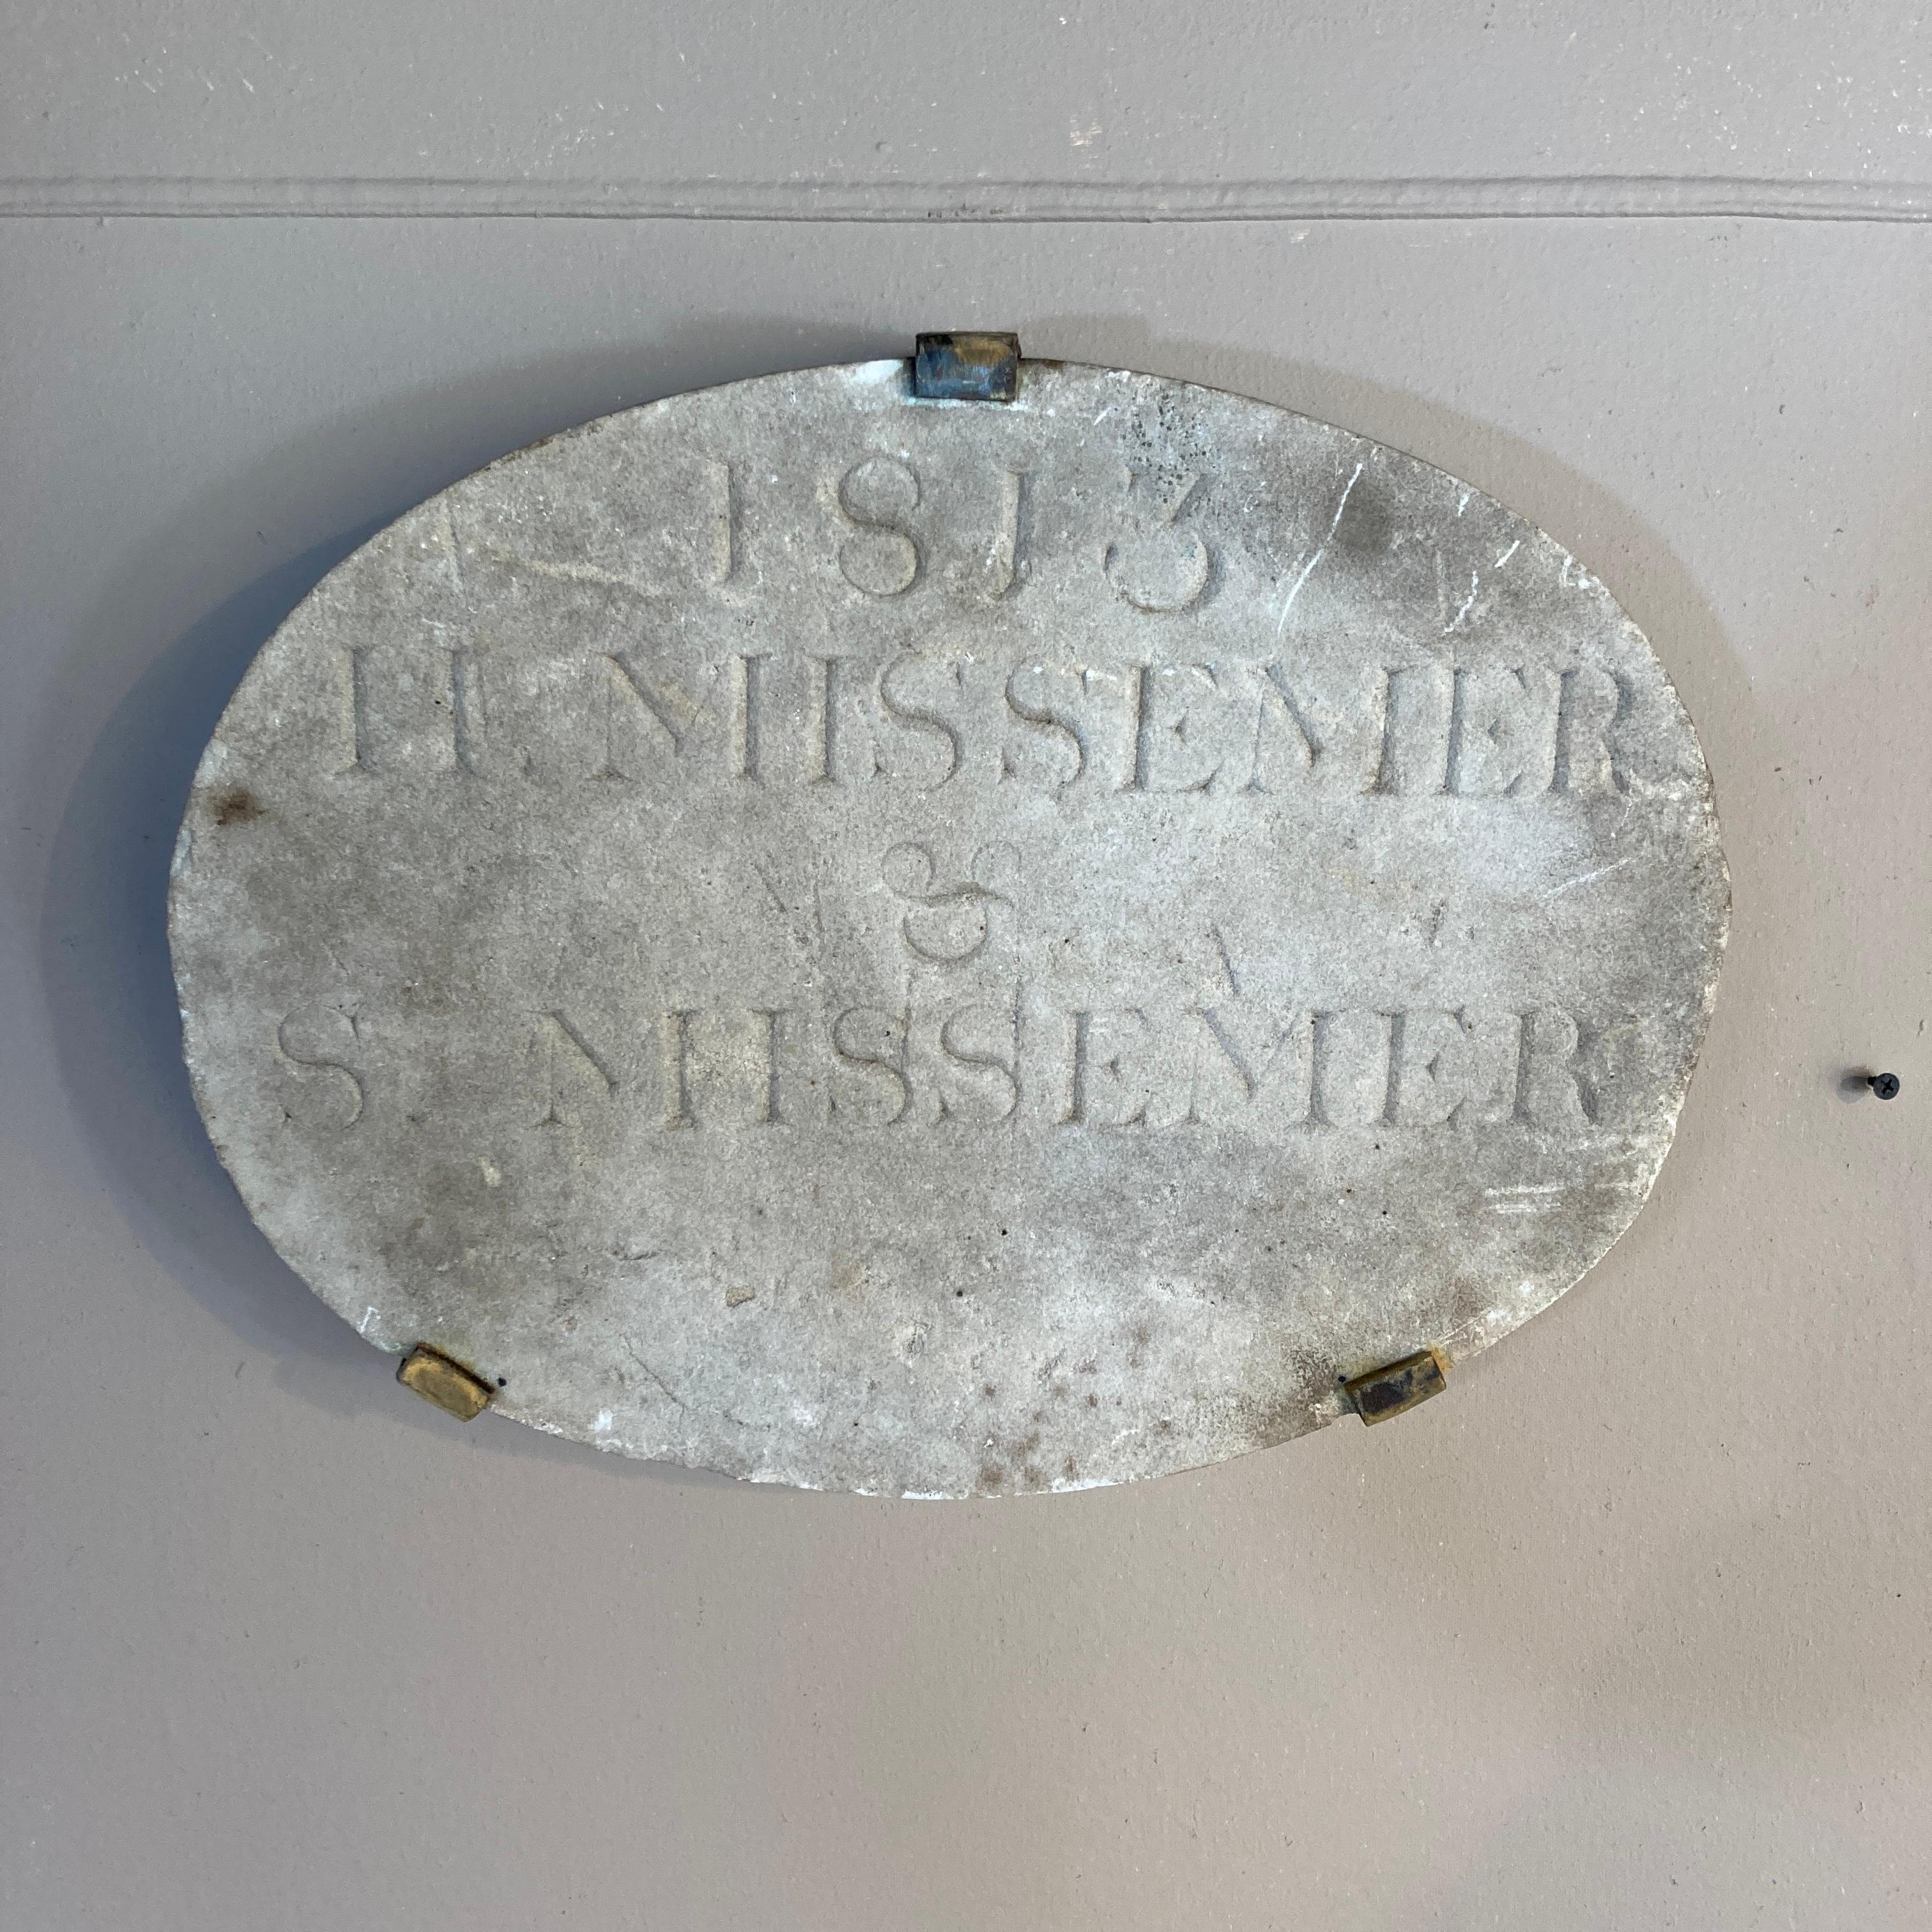 A haunting and unusual American carved marble building marker, probable New England origin circa 1813. The names inscribed are H. Missemer & S. Missemer. It is in entirely original condition, and the surface exhibits two centuries of weathering. We